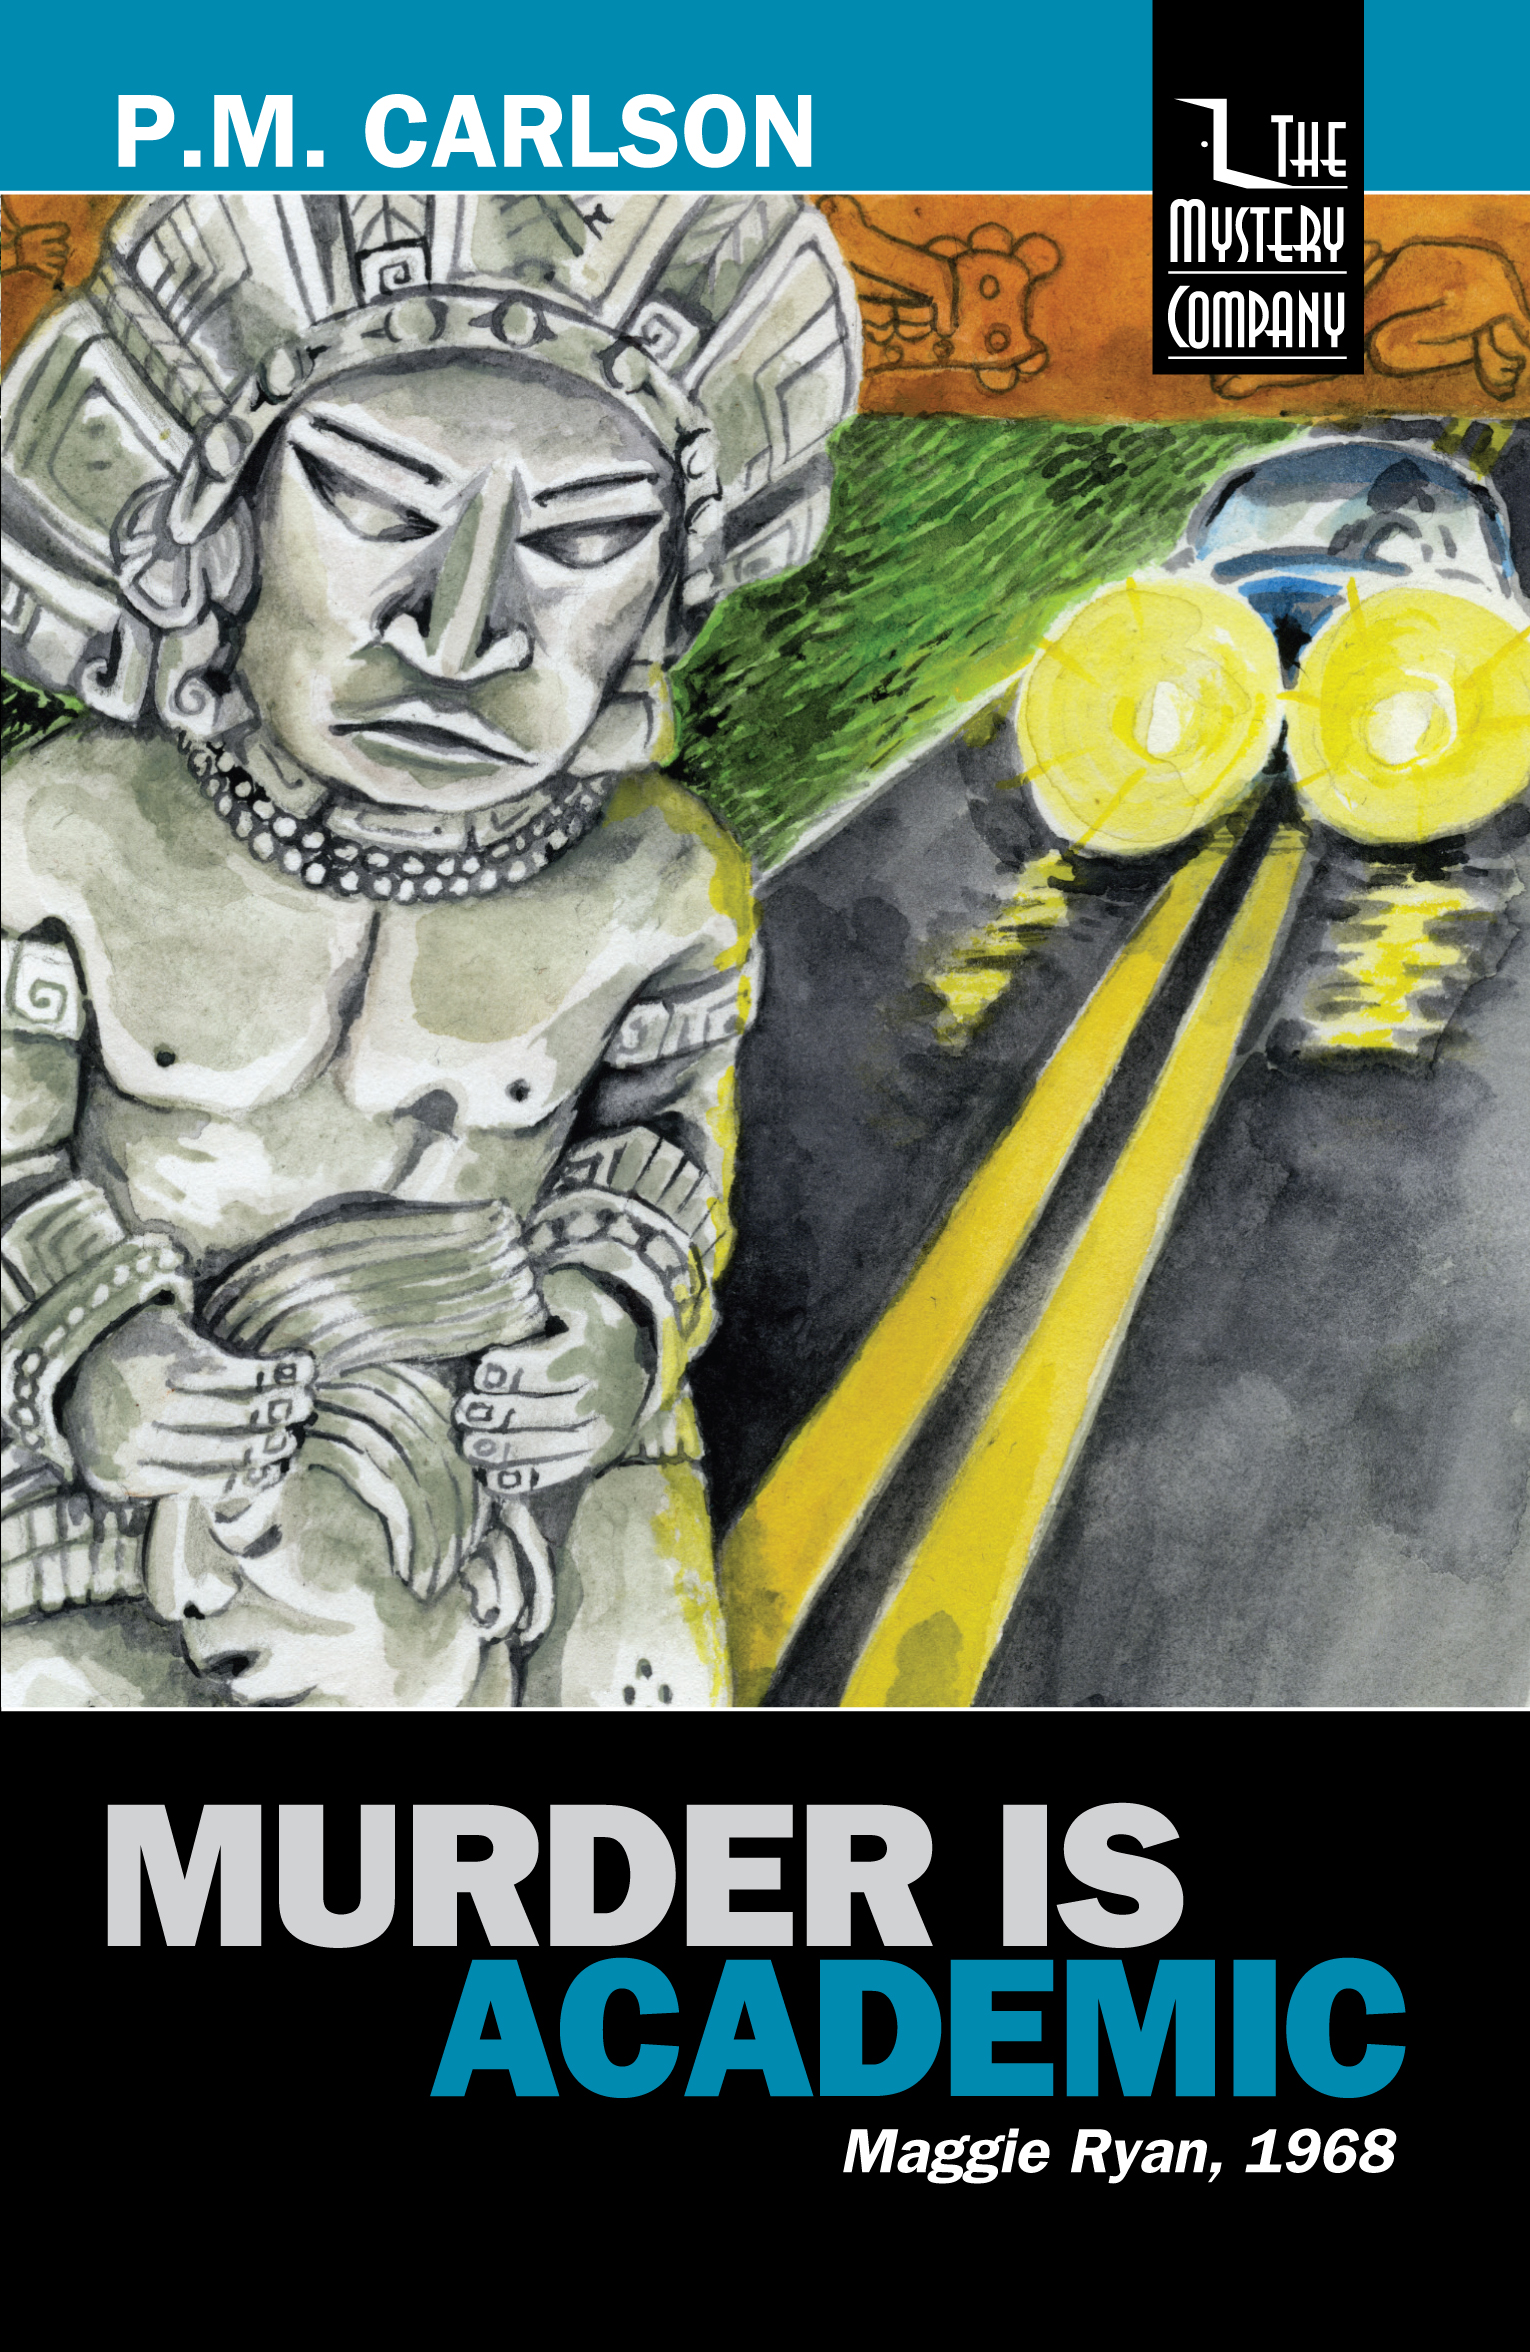 Murder Is Academic by P.M. Carlson